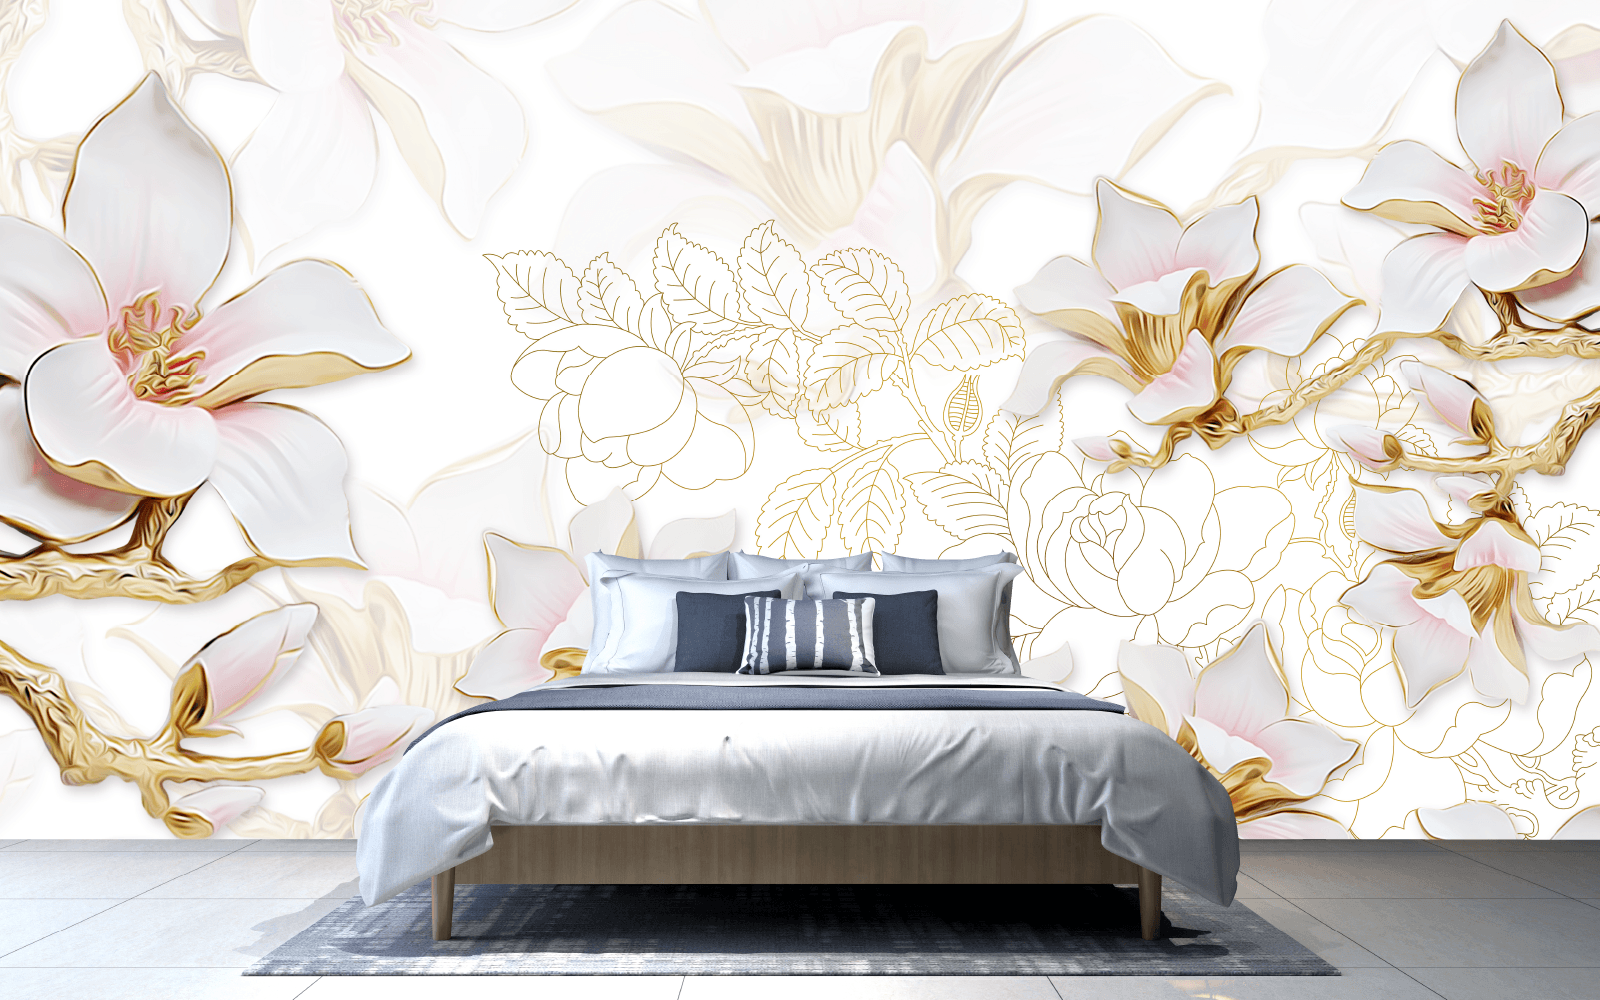 A stunning mixture of delicate blooming flowers, and striking gold sketches. 